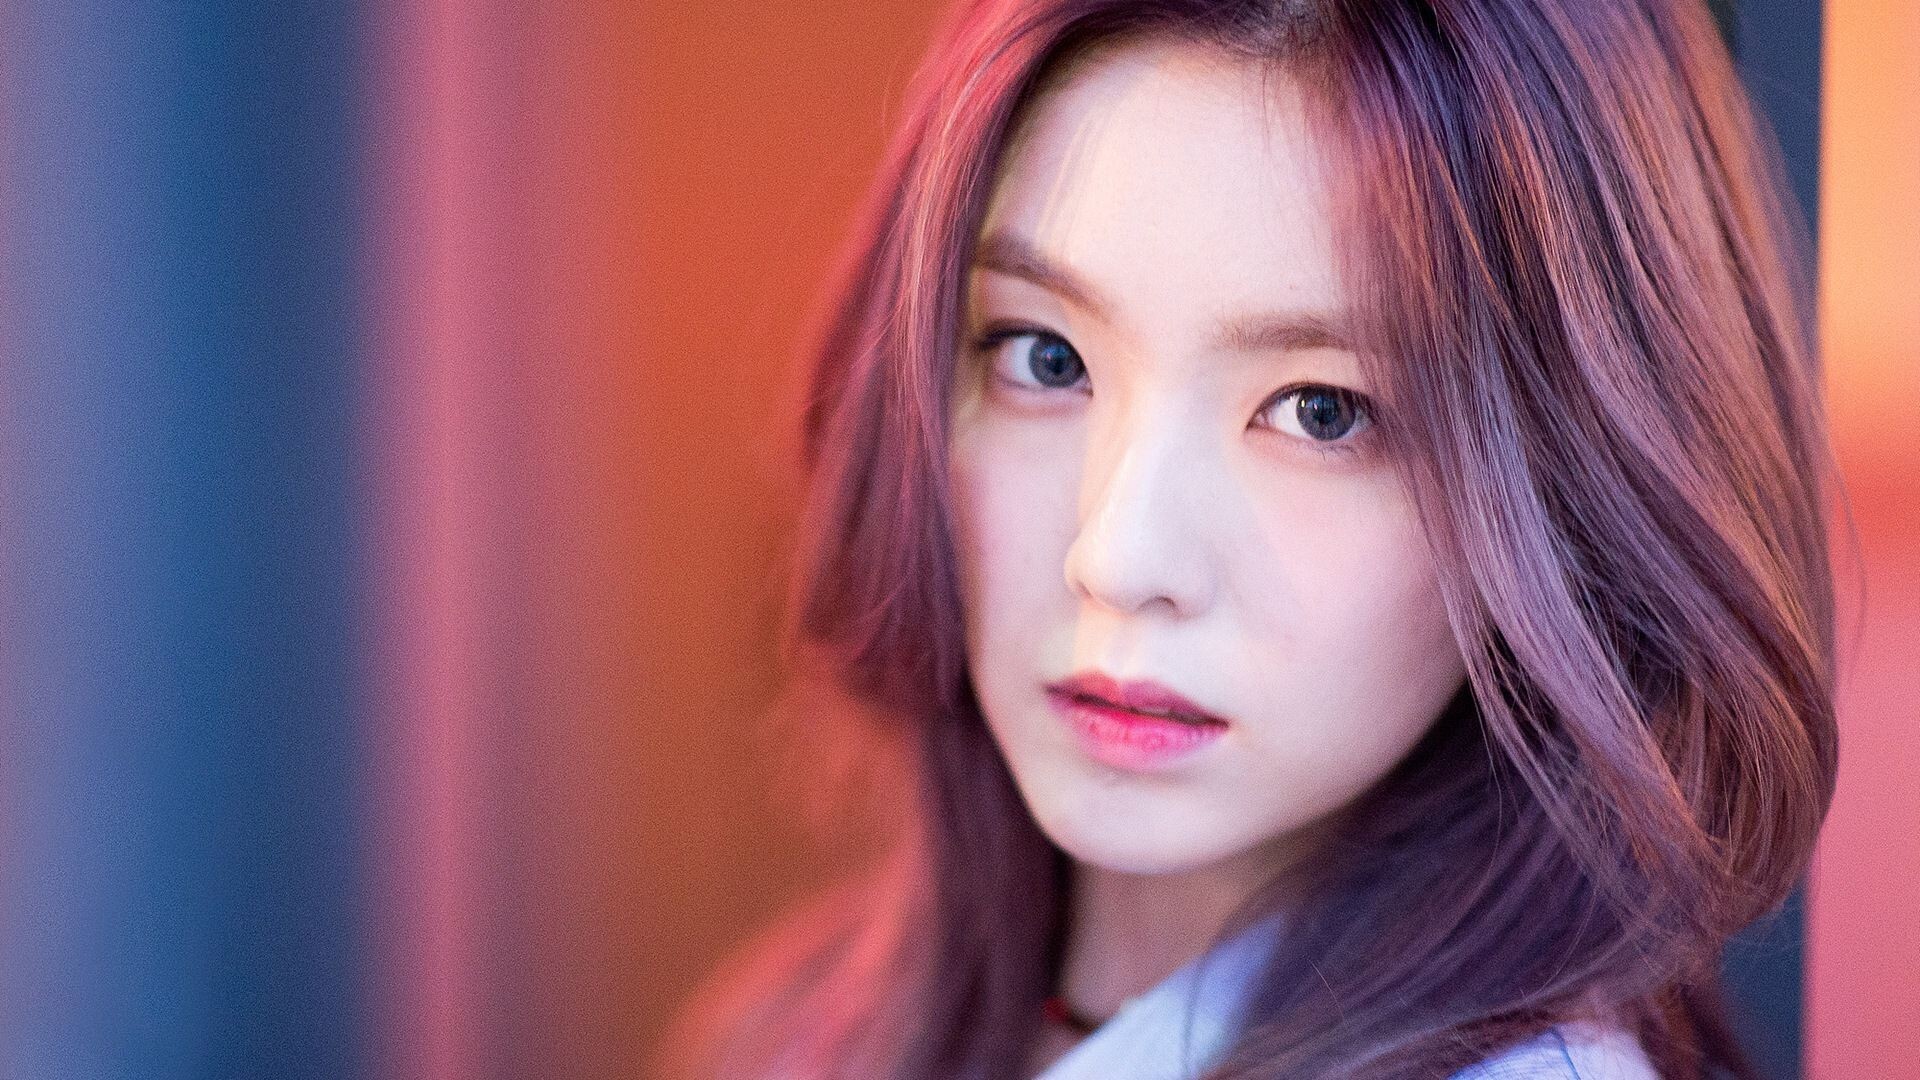 Irene of K-pop group Red Velvet is under pressure to leave the band despite apologising for bullying a stylist. Photo: SM Entertainment